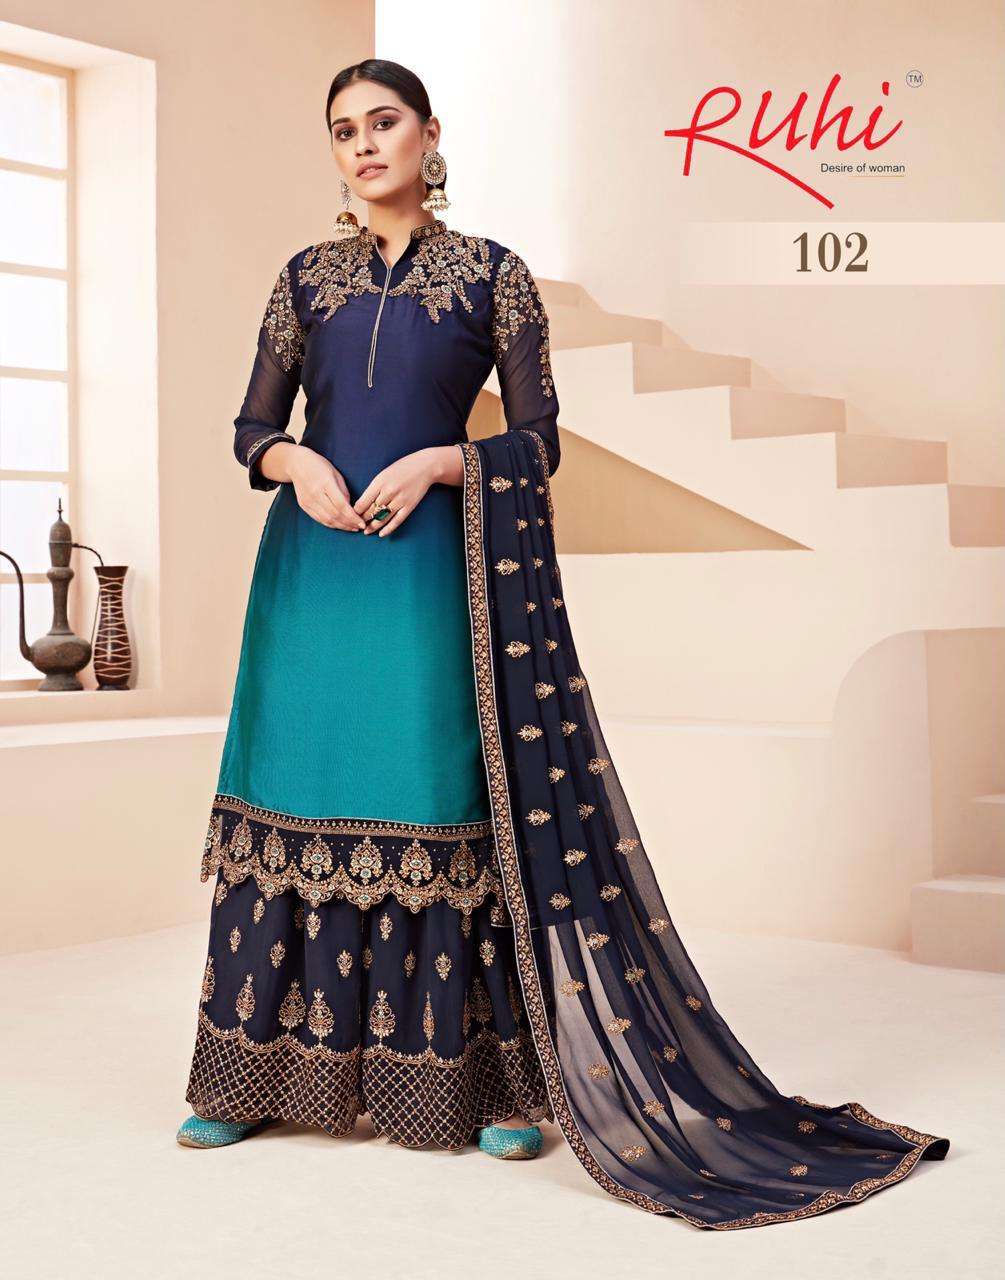 DESIRE OF WOMEN BY RUHI 101 TO 105 SERIES BEAUTIFUL STYLISH FANCY COLORFUL CASUAL WEAR & ETHNIC WEAR & READY TO WEAR SATIN GEORGETTE/RANGOLI WITH EMBROIDERY DRESSES AT WHOLESALE PRICE